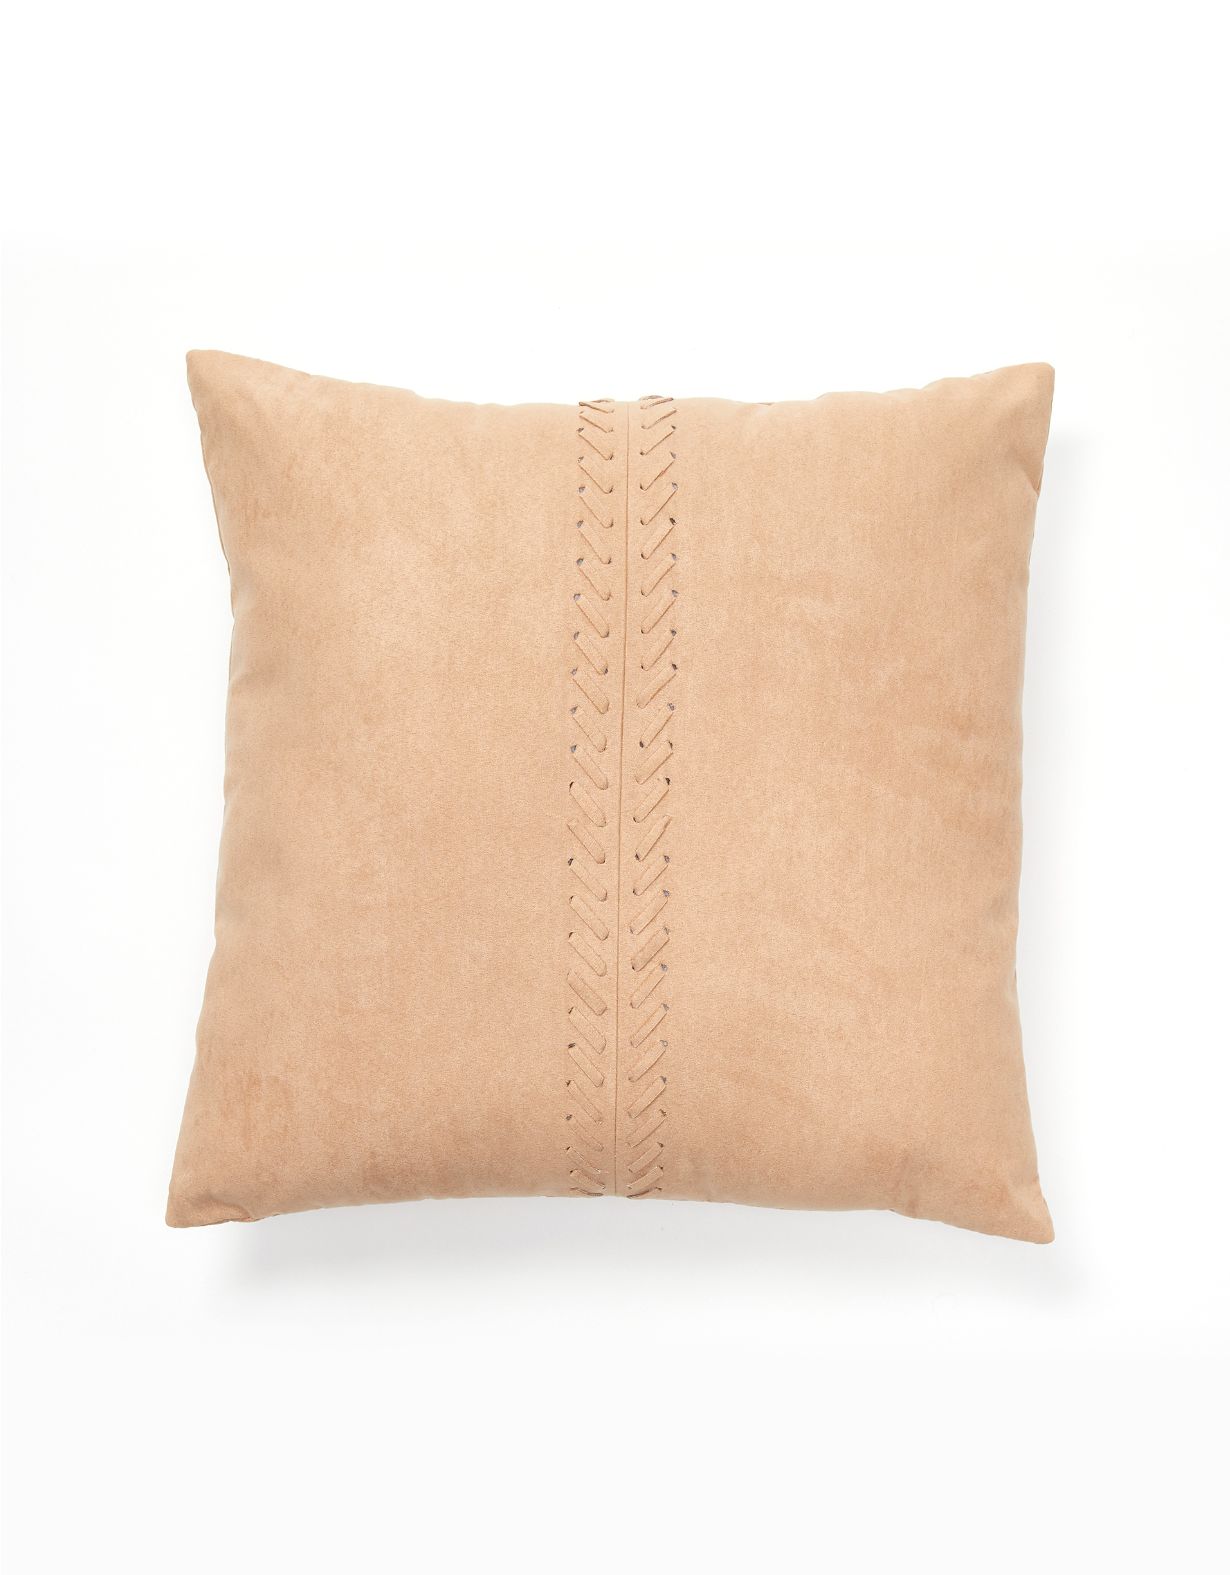 Dormify Stitched Suede Pillow